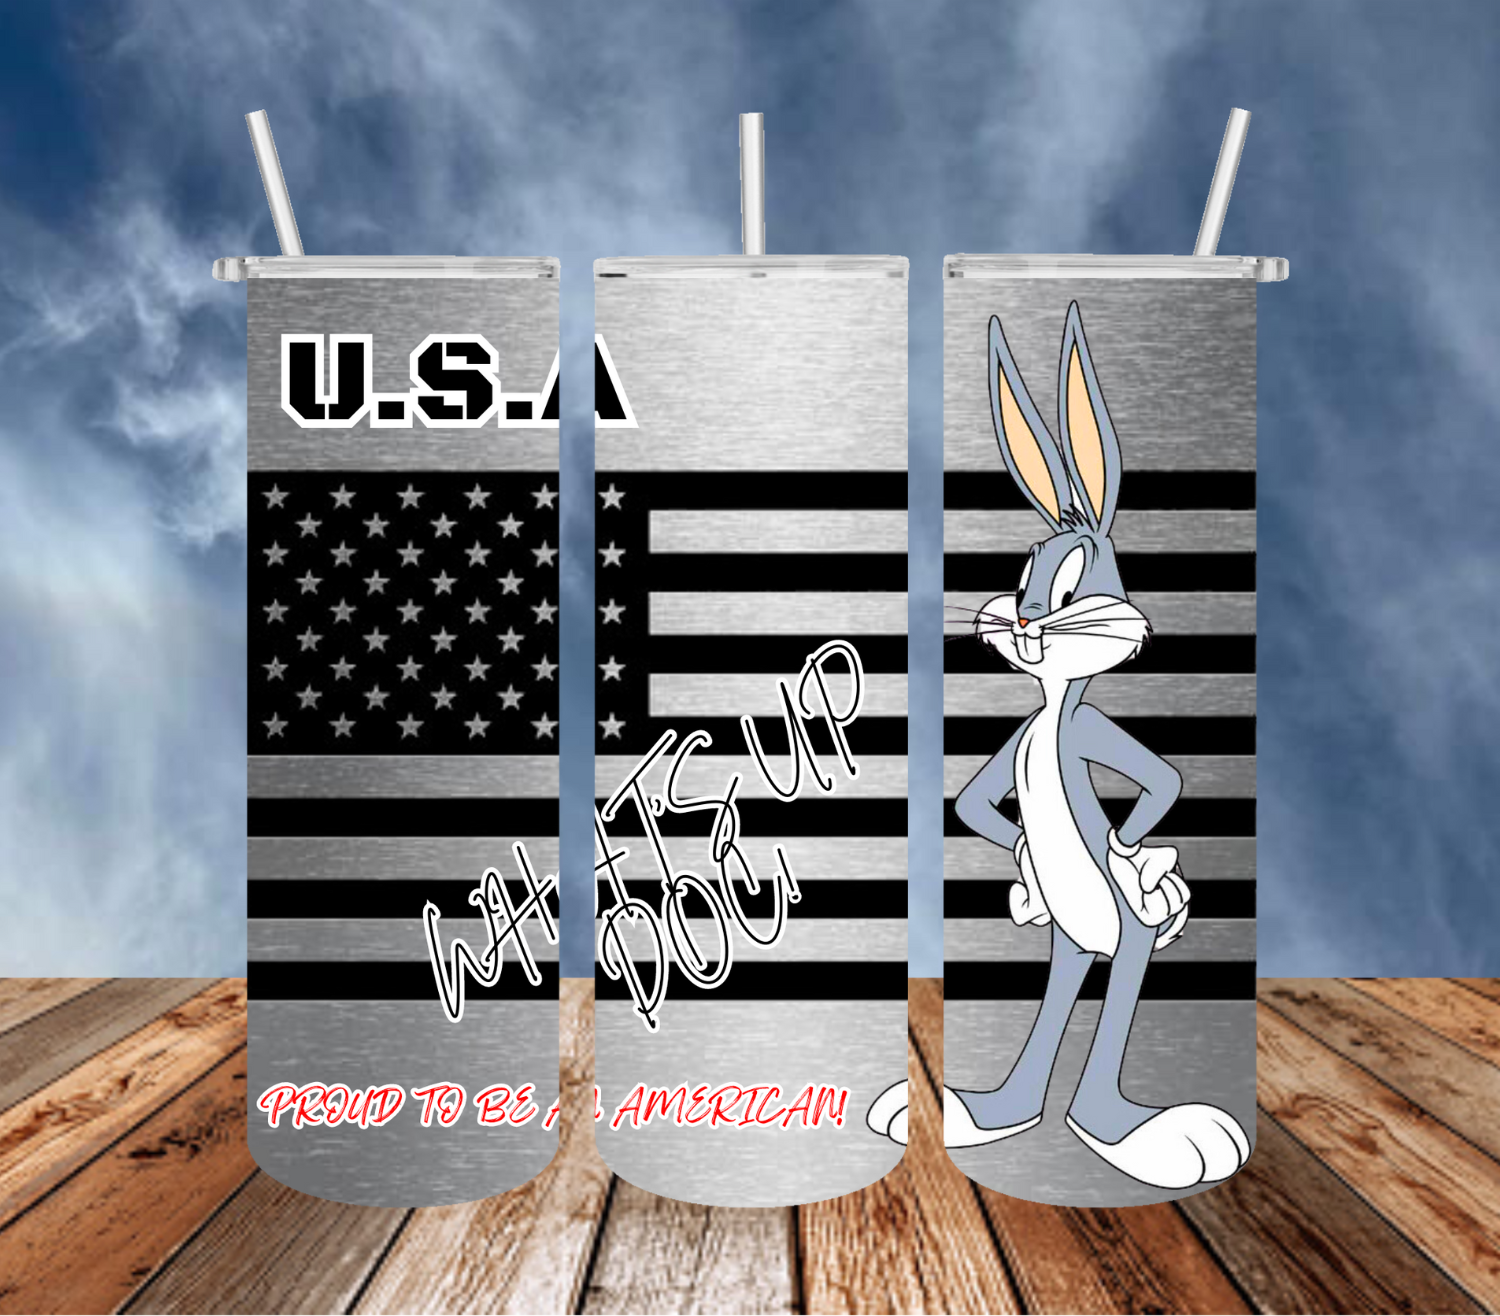 U.S.A What&#39;s up Doc!